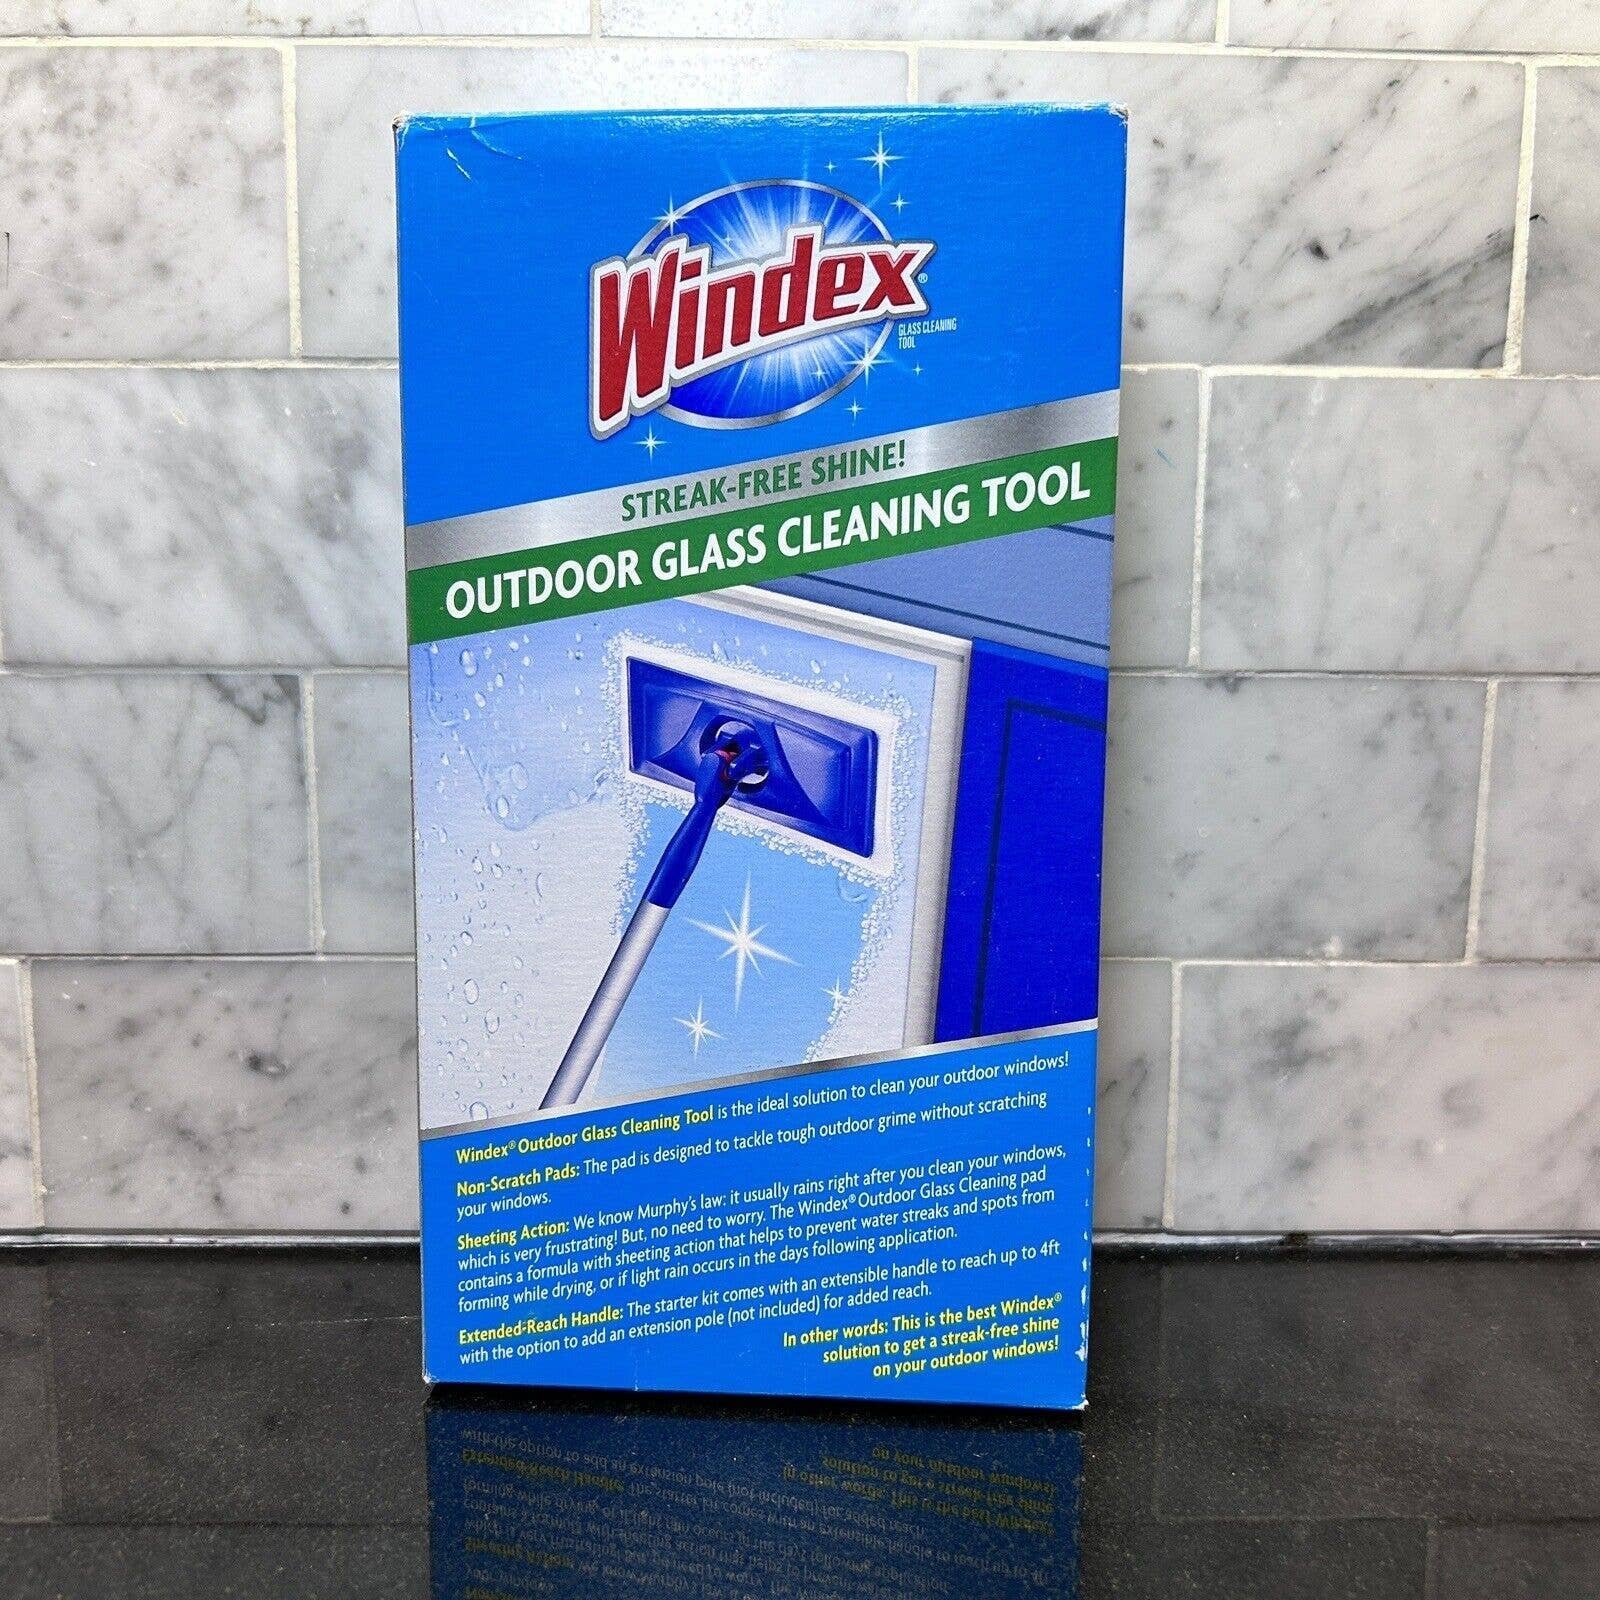 Windex Outdoor Glass Cleaning Tool Window Cleaner Starter Kit New e2lGq7zGm